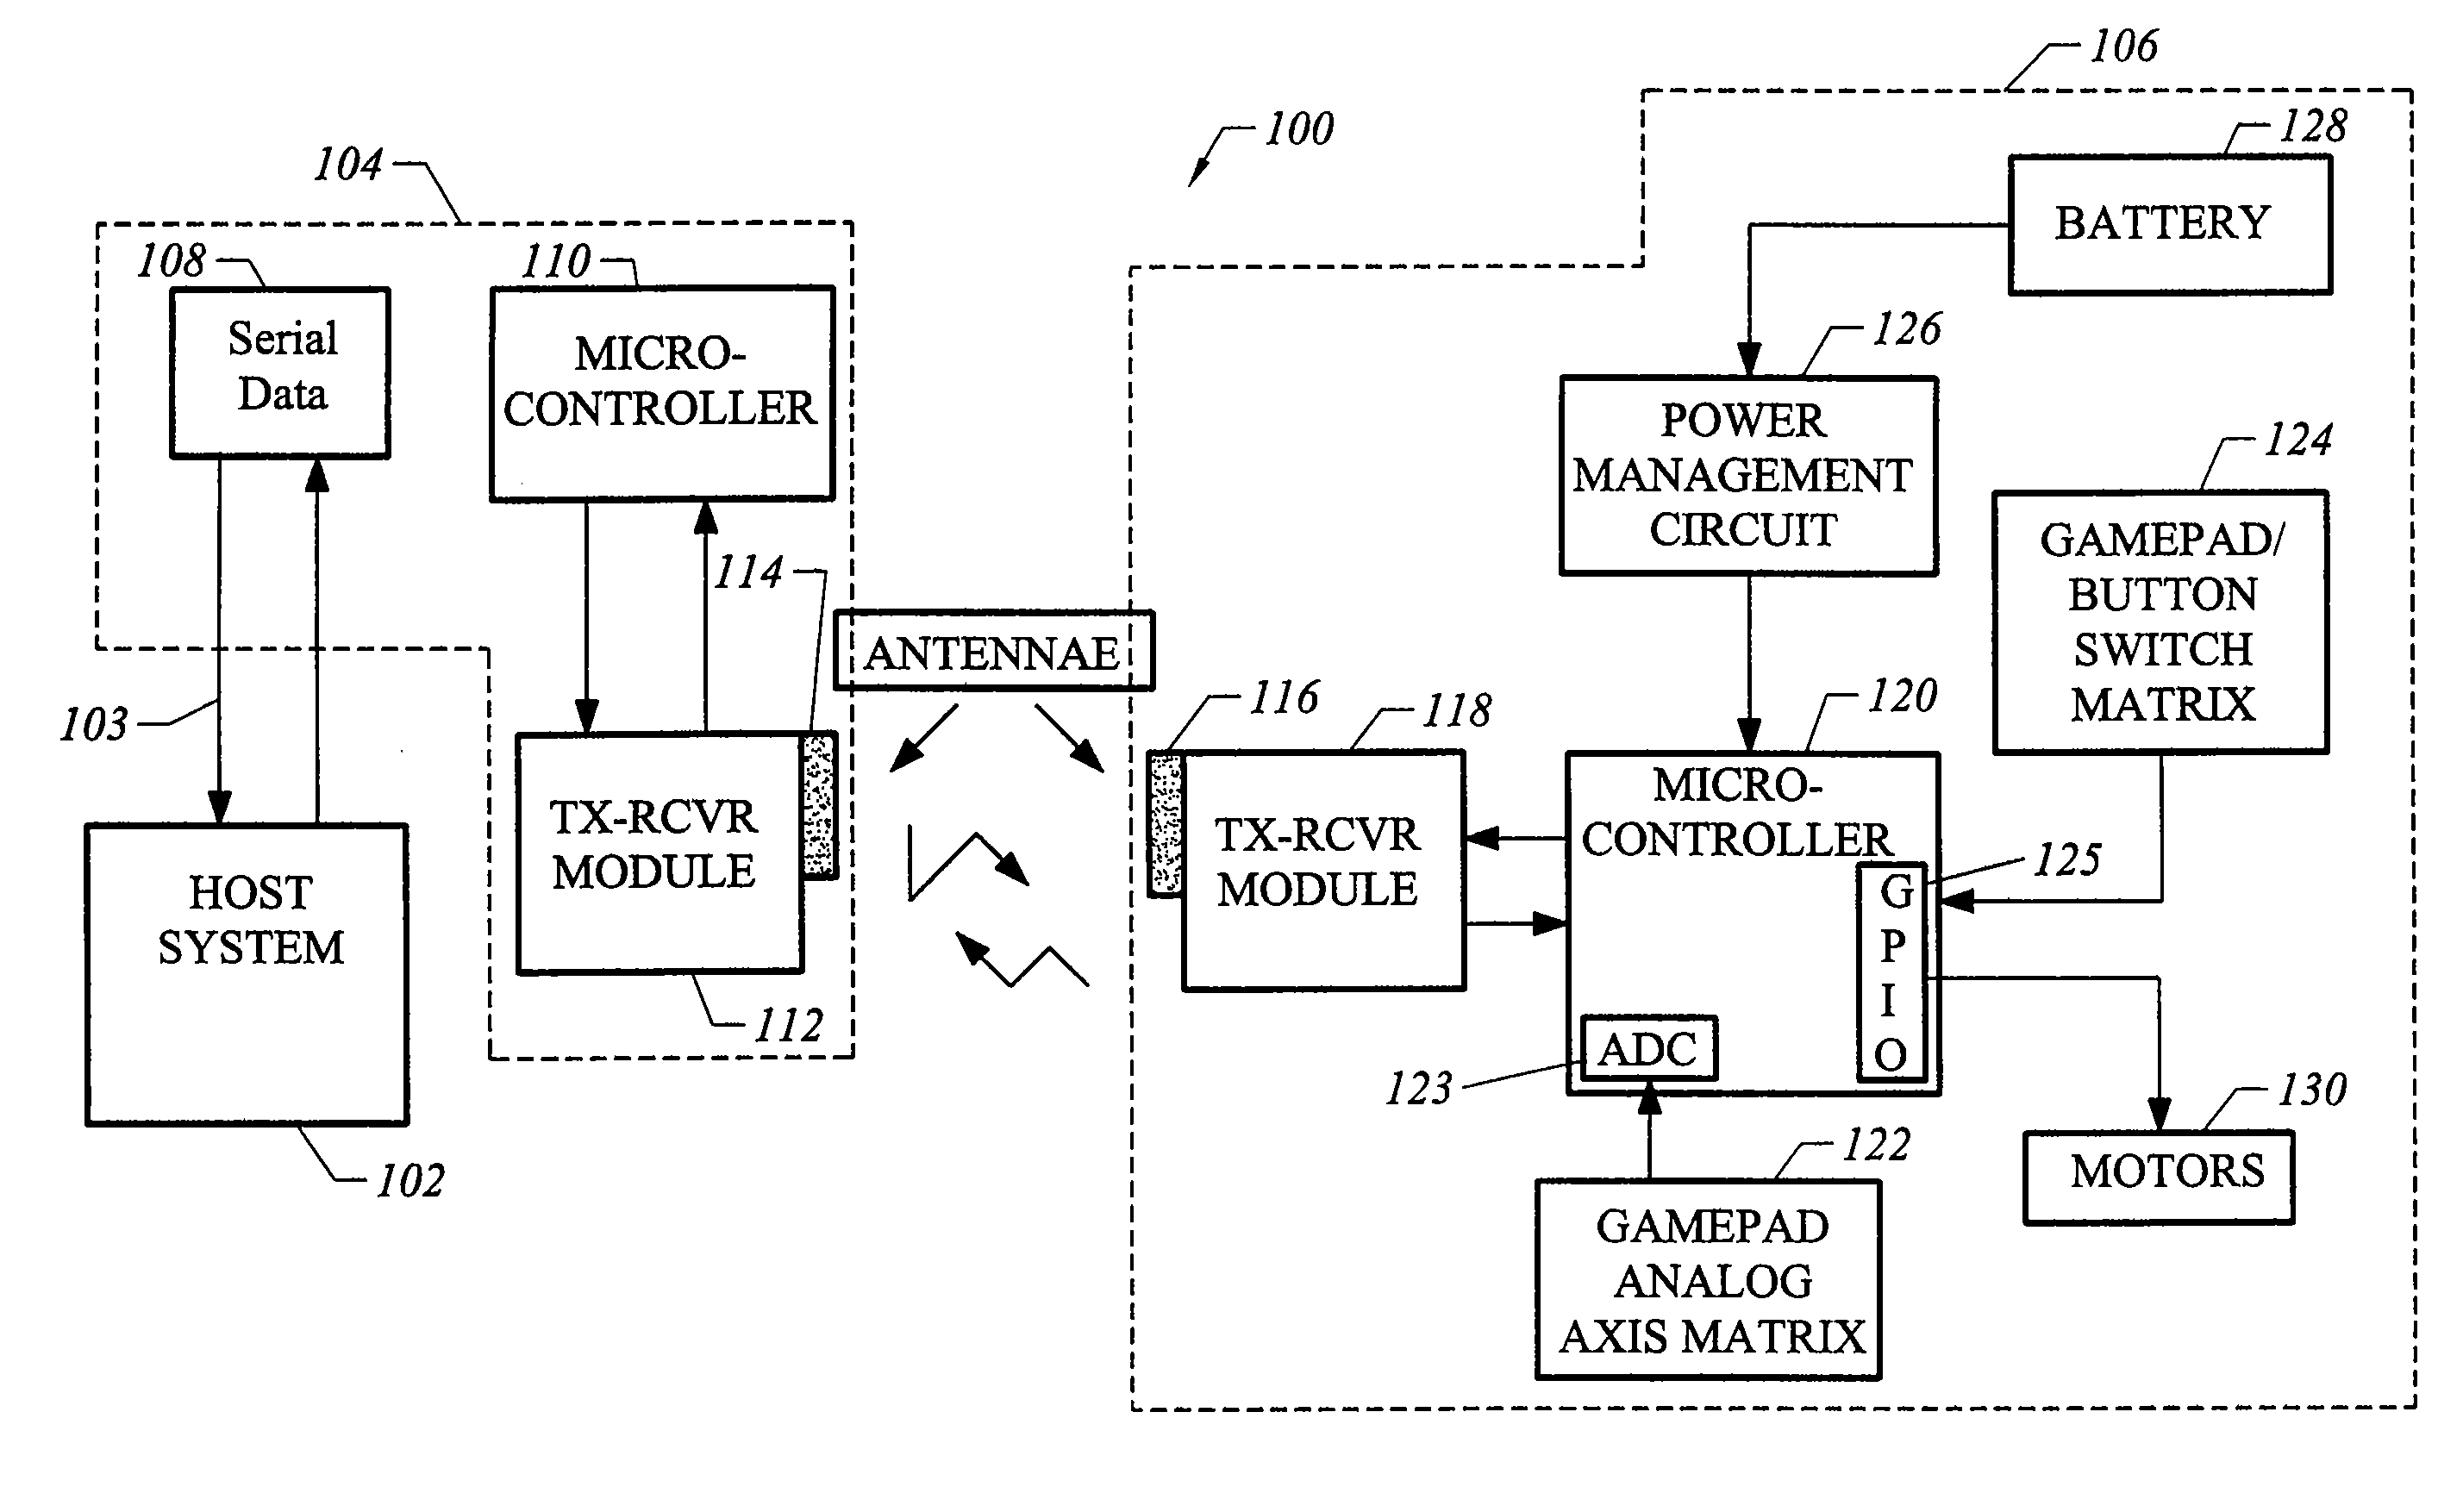 High-frequency wireless peripheral device with auto-connection and auto-synchronization